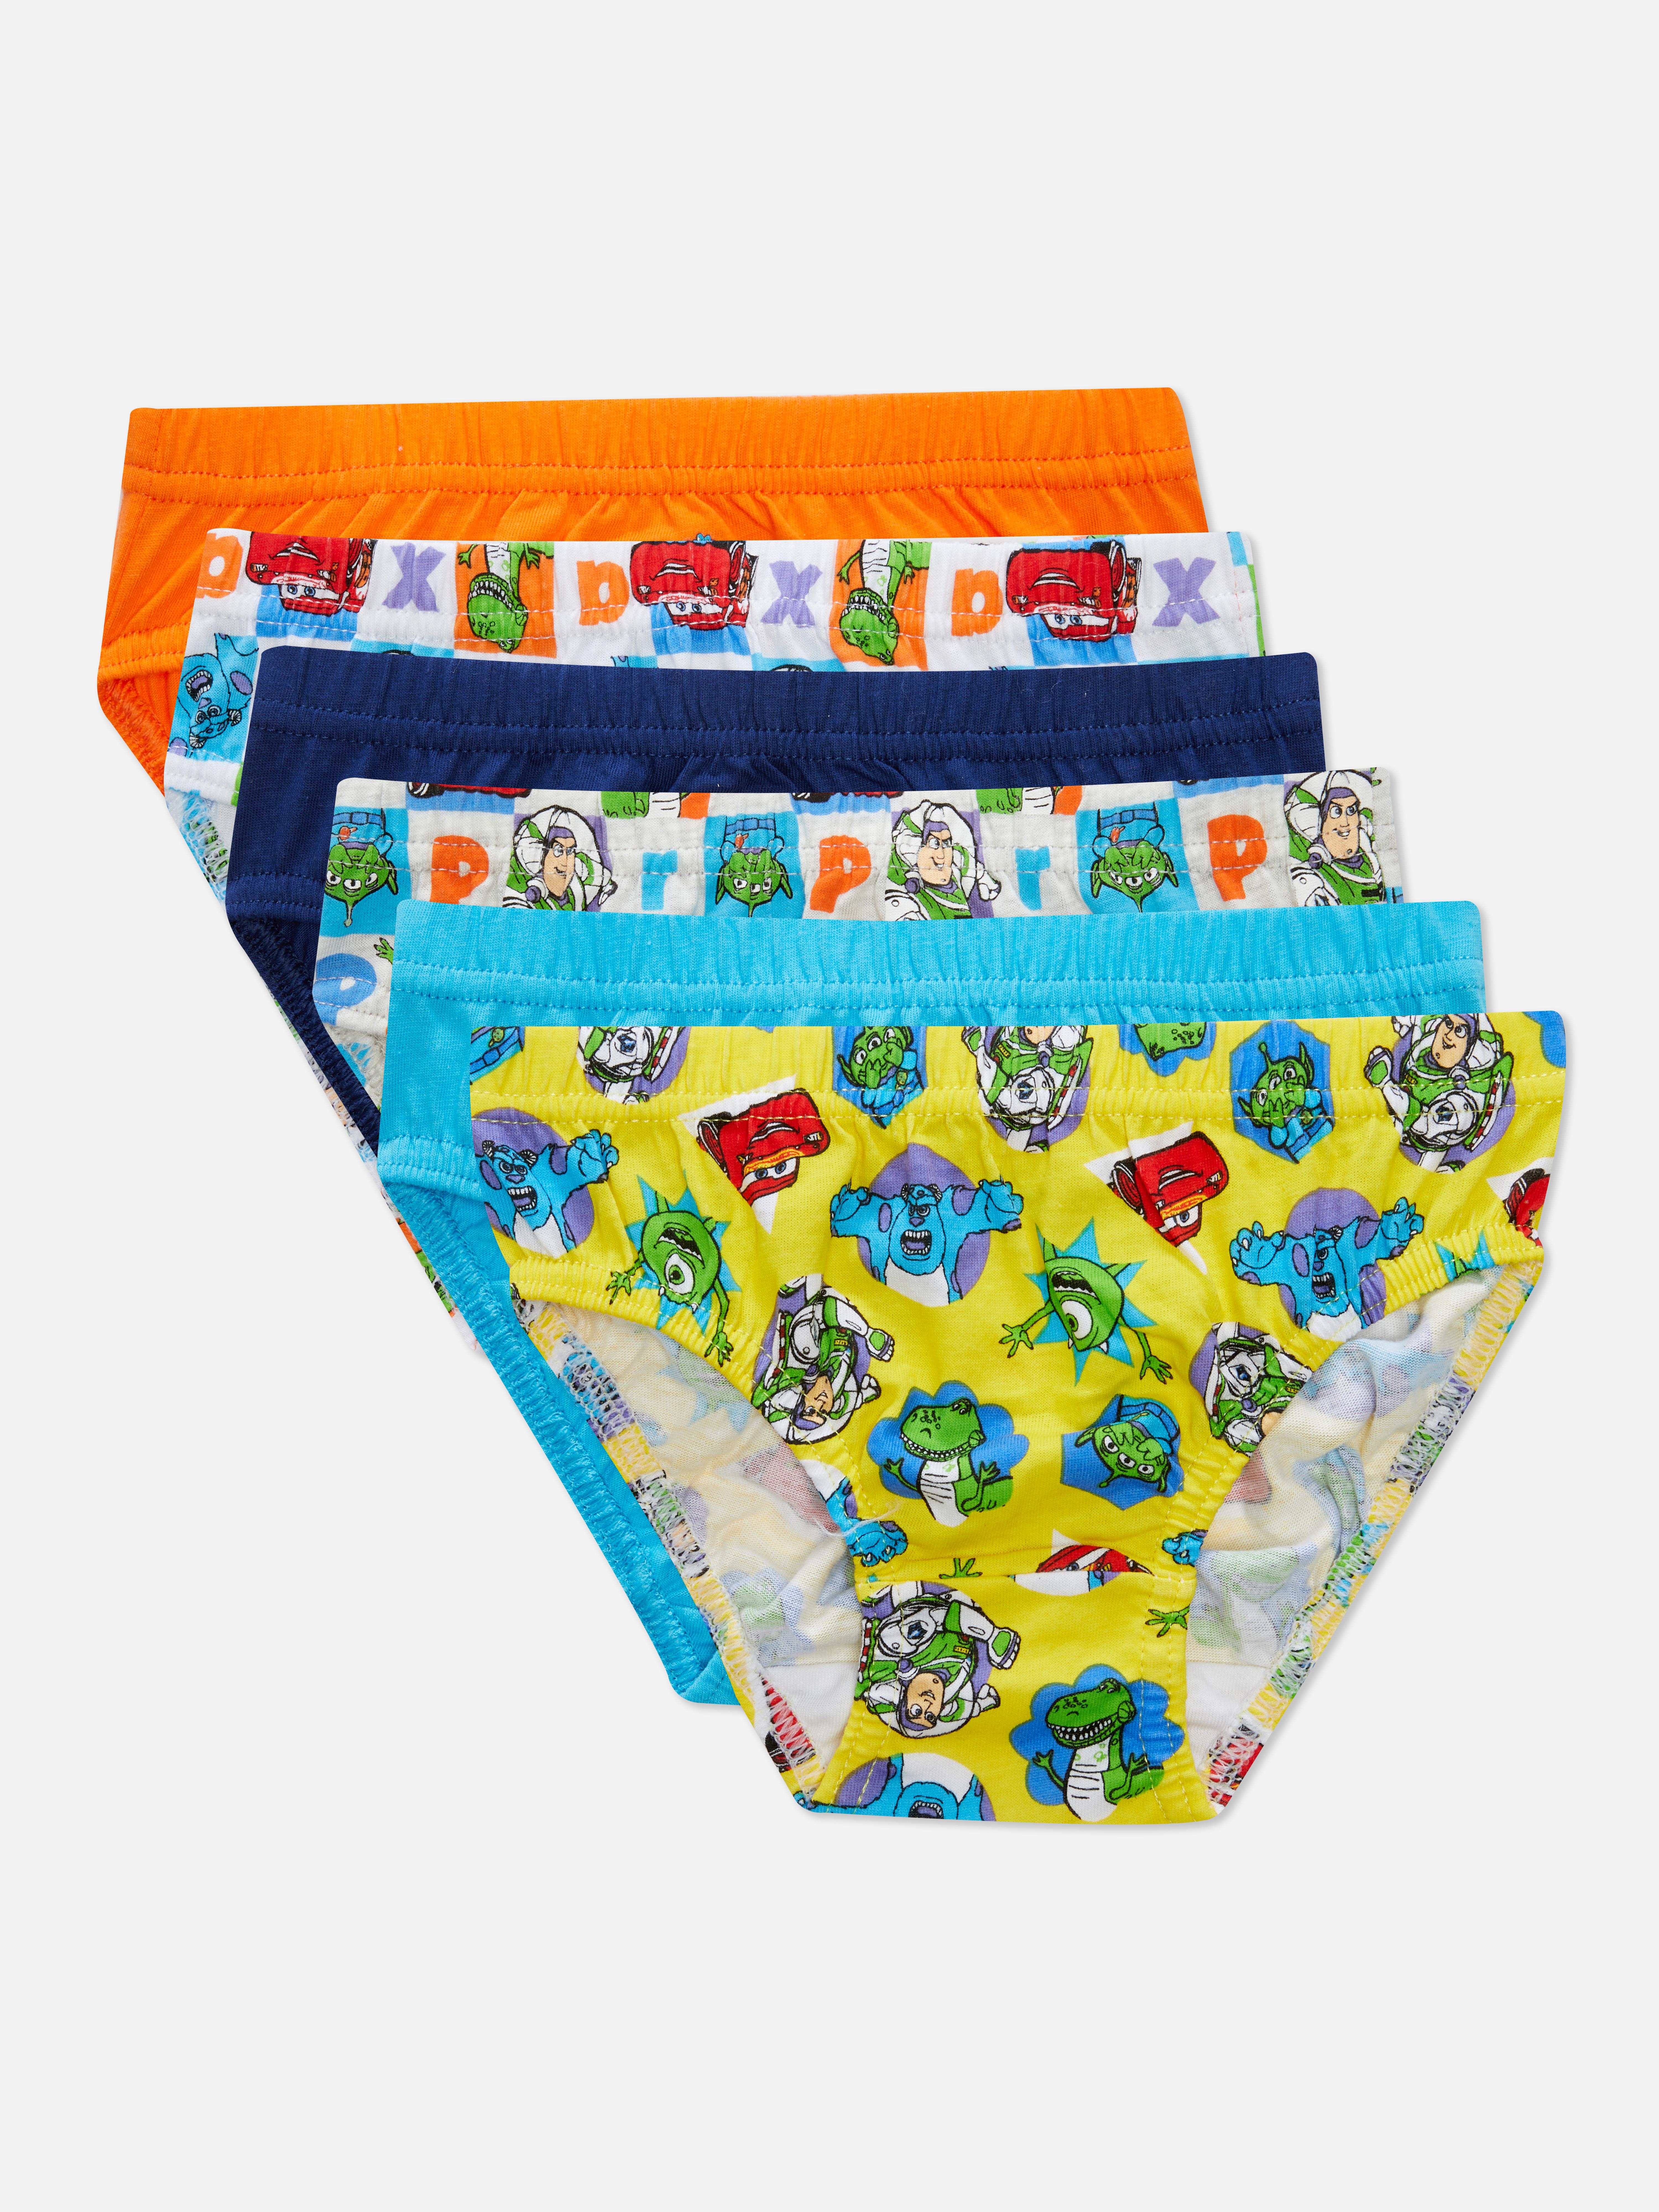 3 Pack Cotton White Disney Bambi or Winnie the Pooh Briefs from Primark